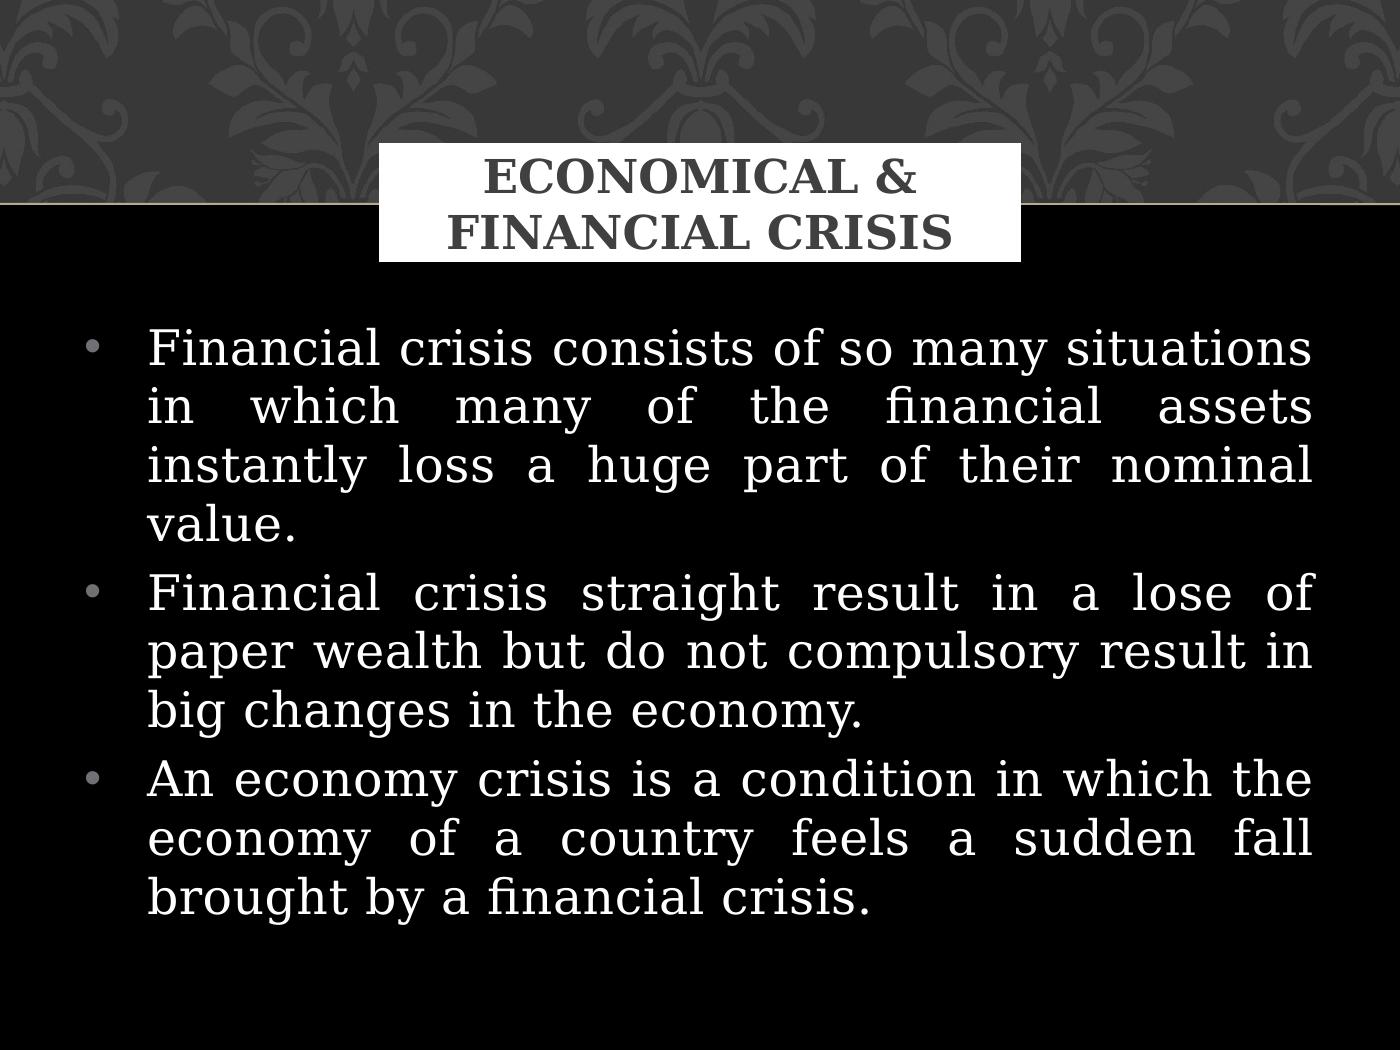 Ethical Leadership for Economic & Financial Crisis_4